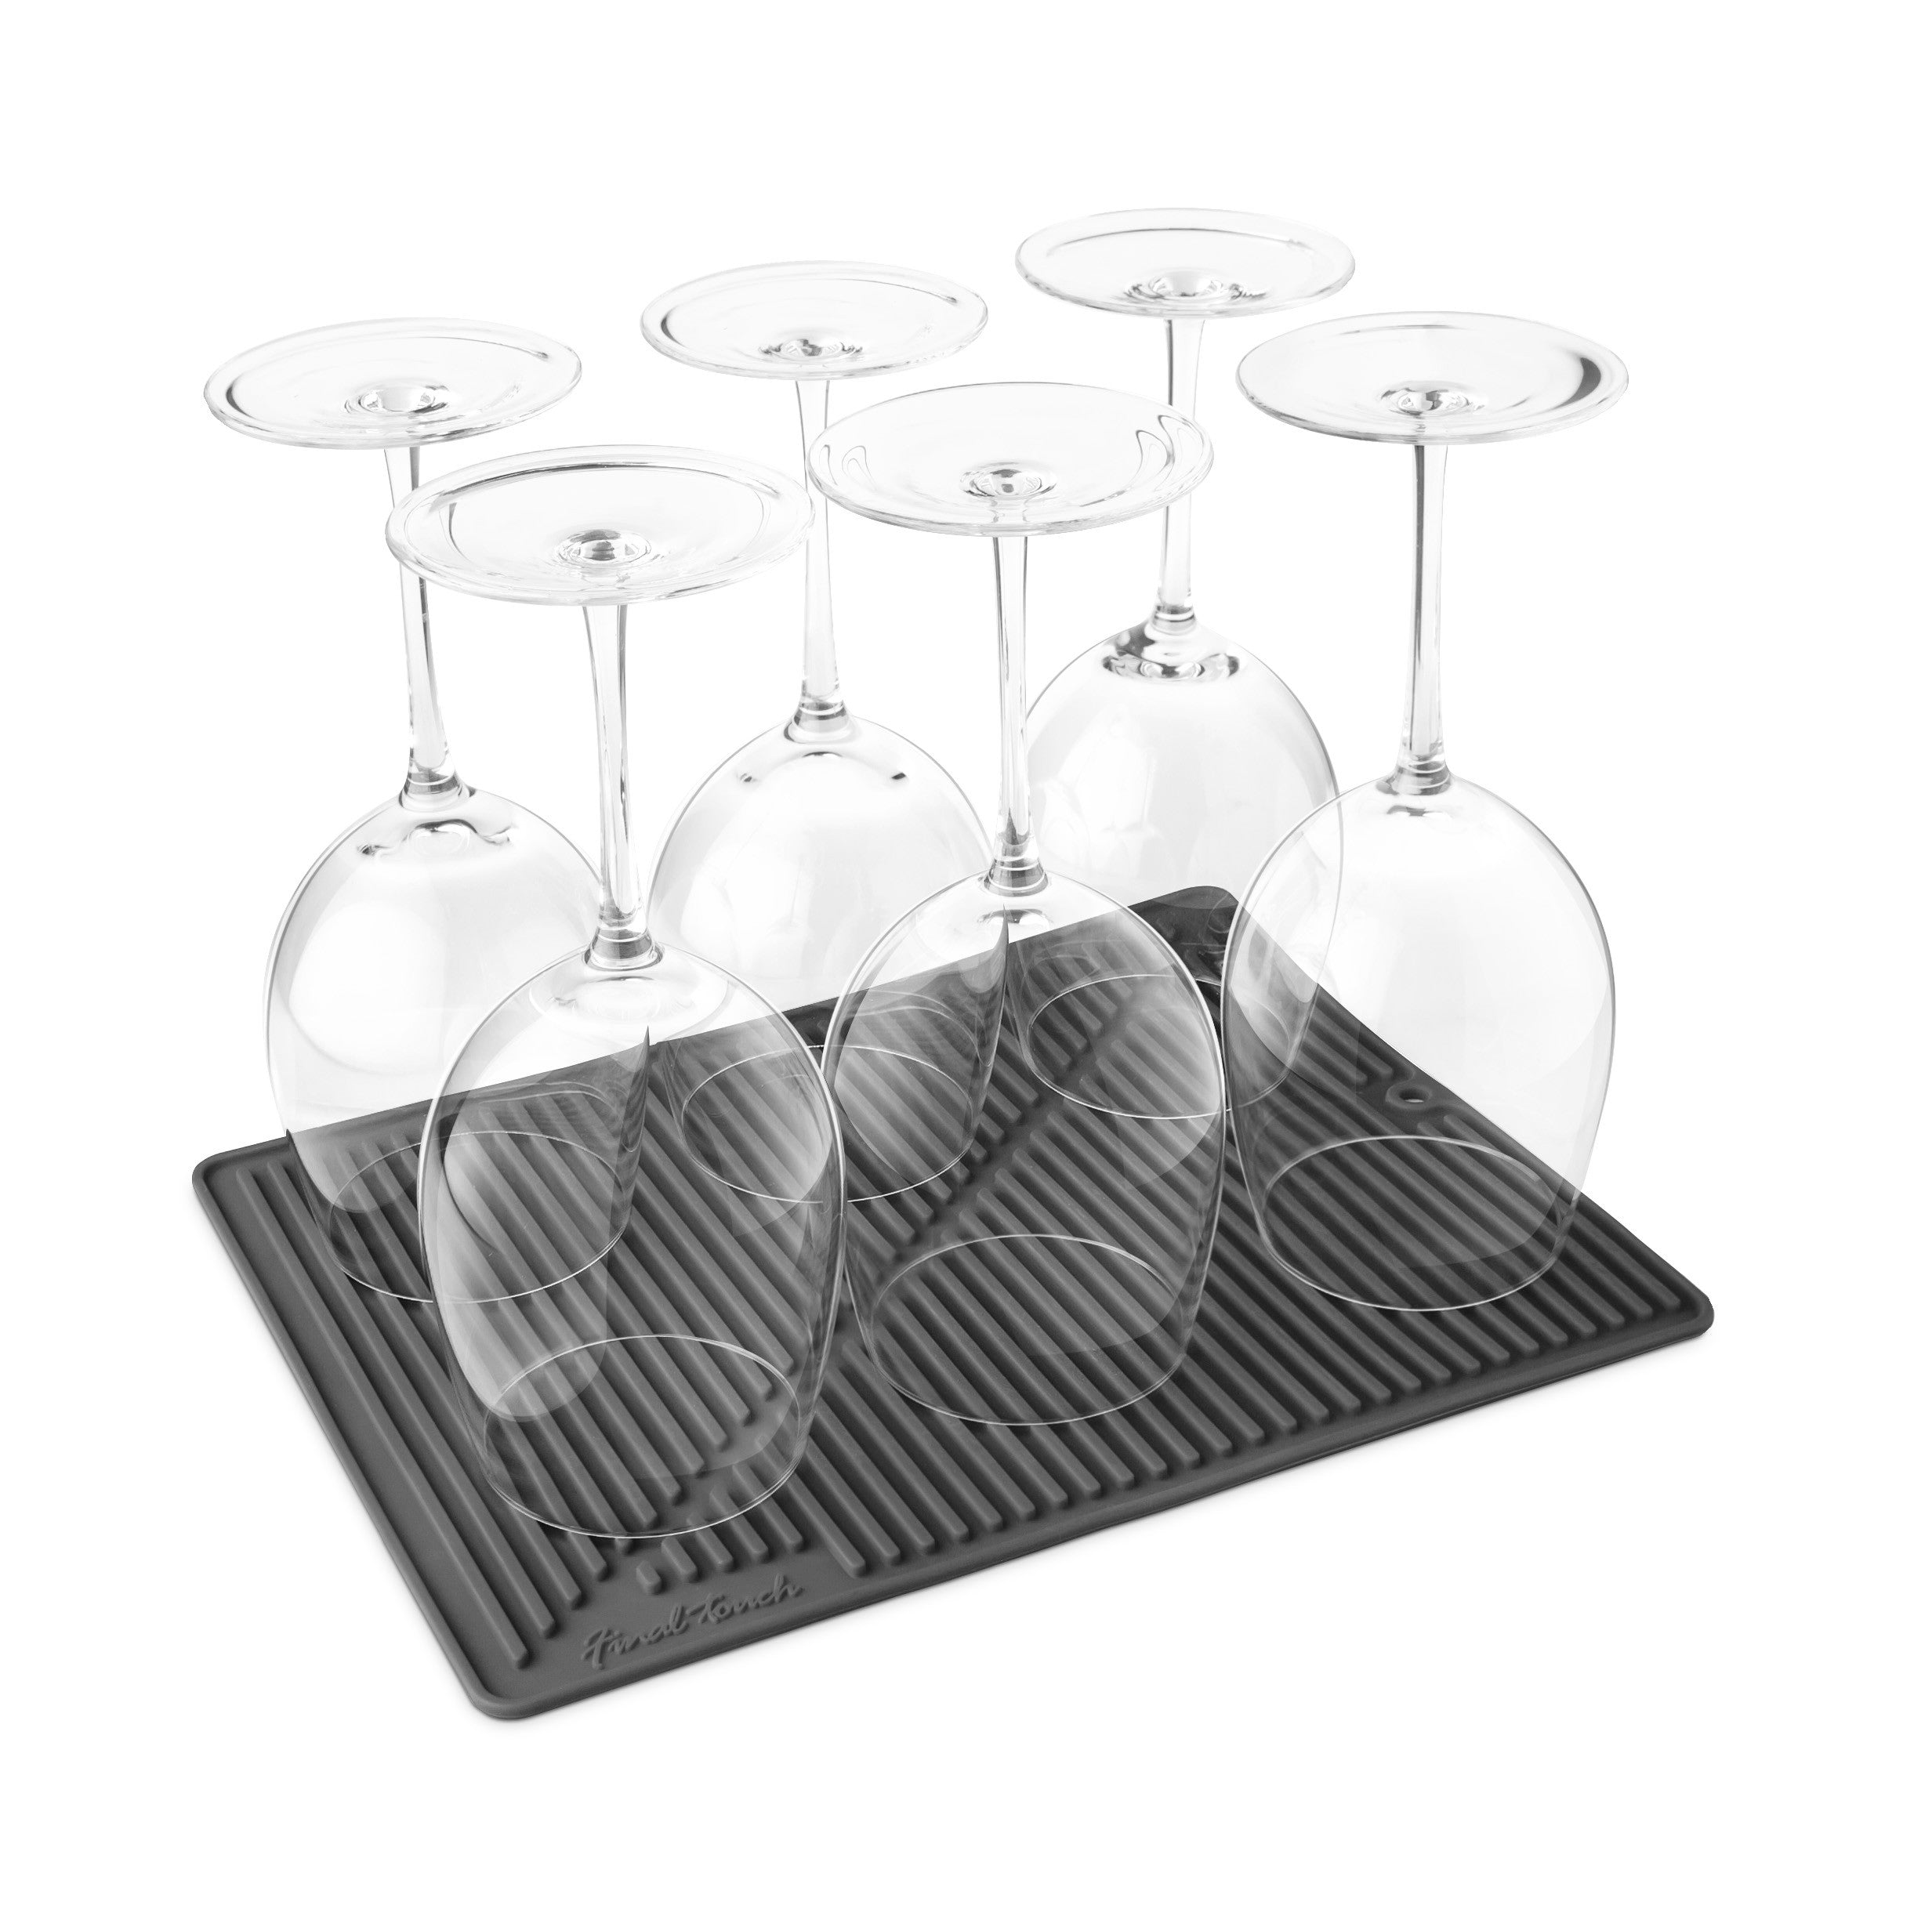 Drymate Wine Glass Drying Mat & Placemat, (Low-Profile) Perfect for Drying  Stemware, Helps Prevent Broken Glasses - Absorbent/Waterproof/Machine